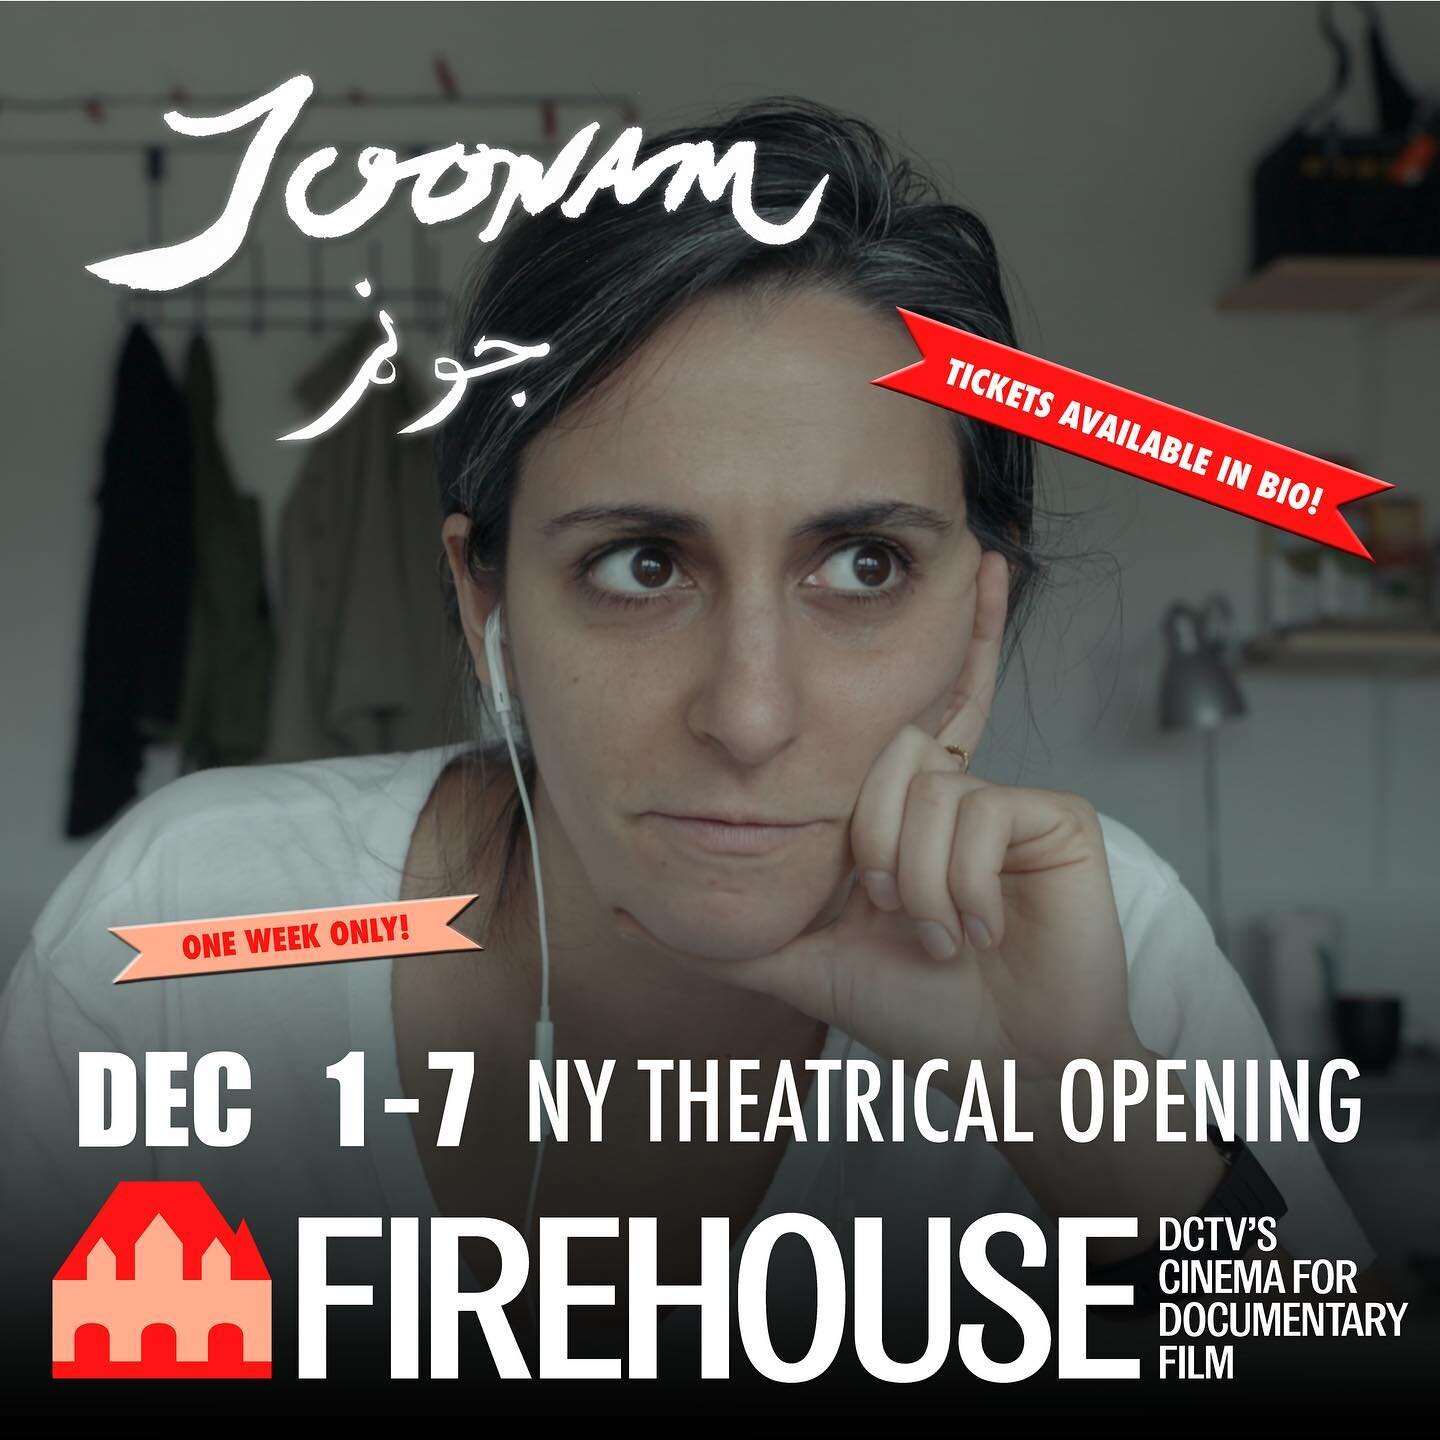 NEW YORK Joonam opens theatrically @dctvny on Dec 1, 2023! 🍿We will be running for ONE WEEK ONLY, so catch the film while you can! 🎟️ Tickets are on sale now (link in bio). ✨Stay tuned for more news about the exciting guests we have lined up for ou